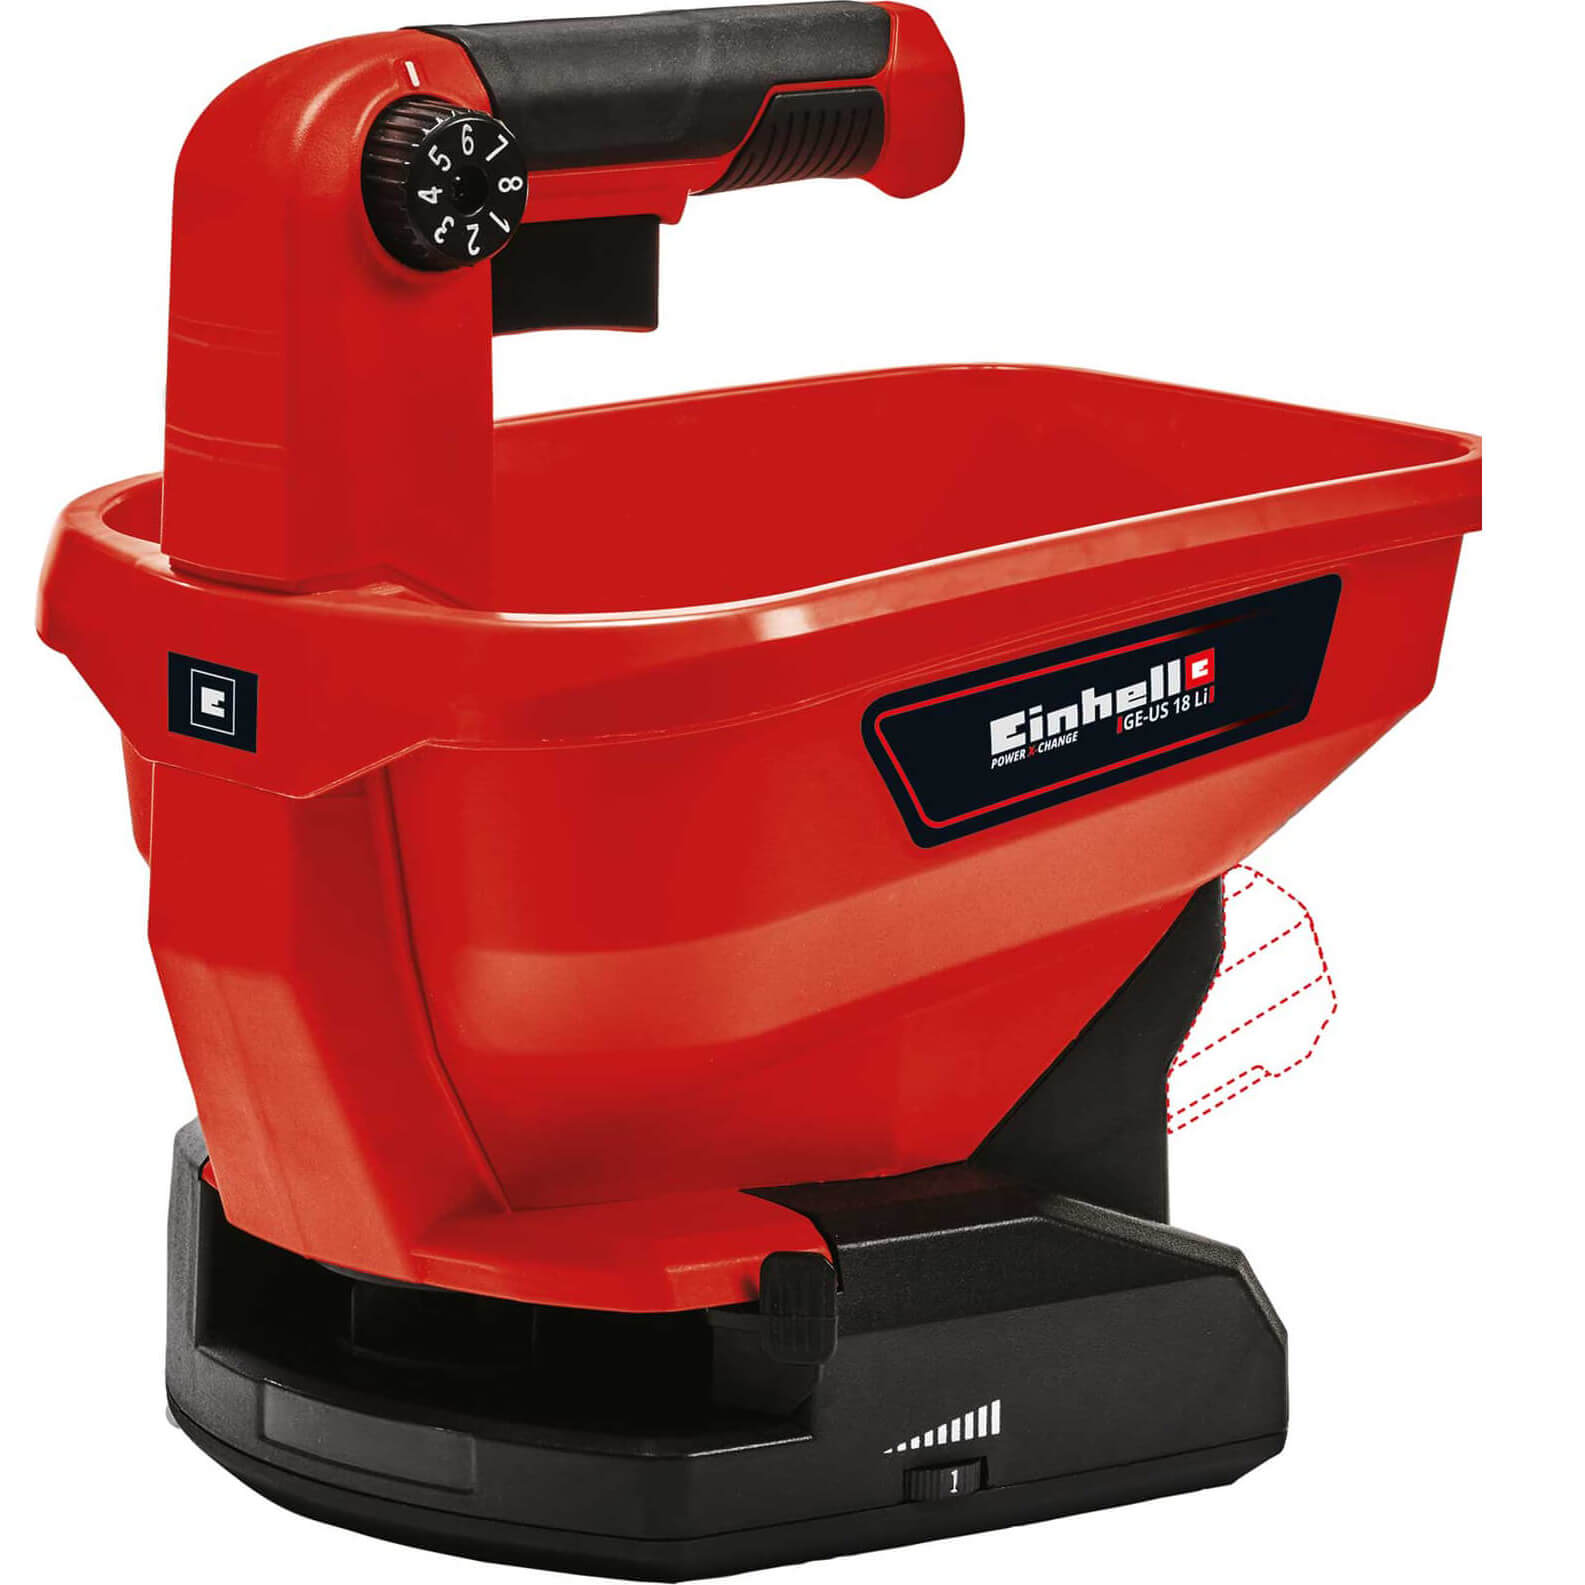 Einhell GE-US 18 Li 18v Cordless Grass, Salt and Seed Spreader No Batteries No Charger